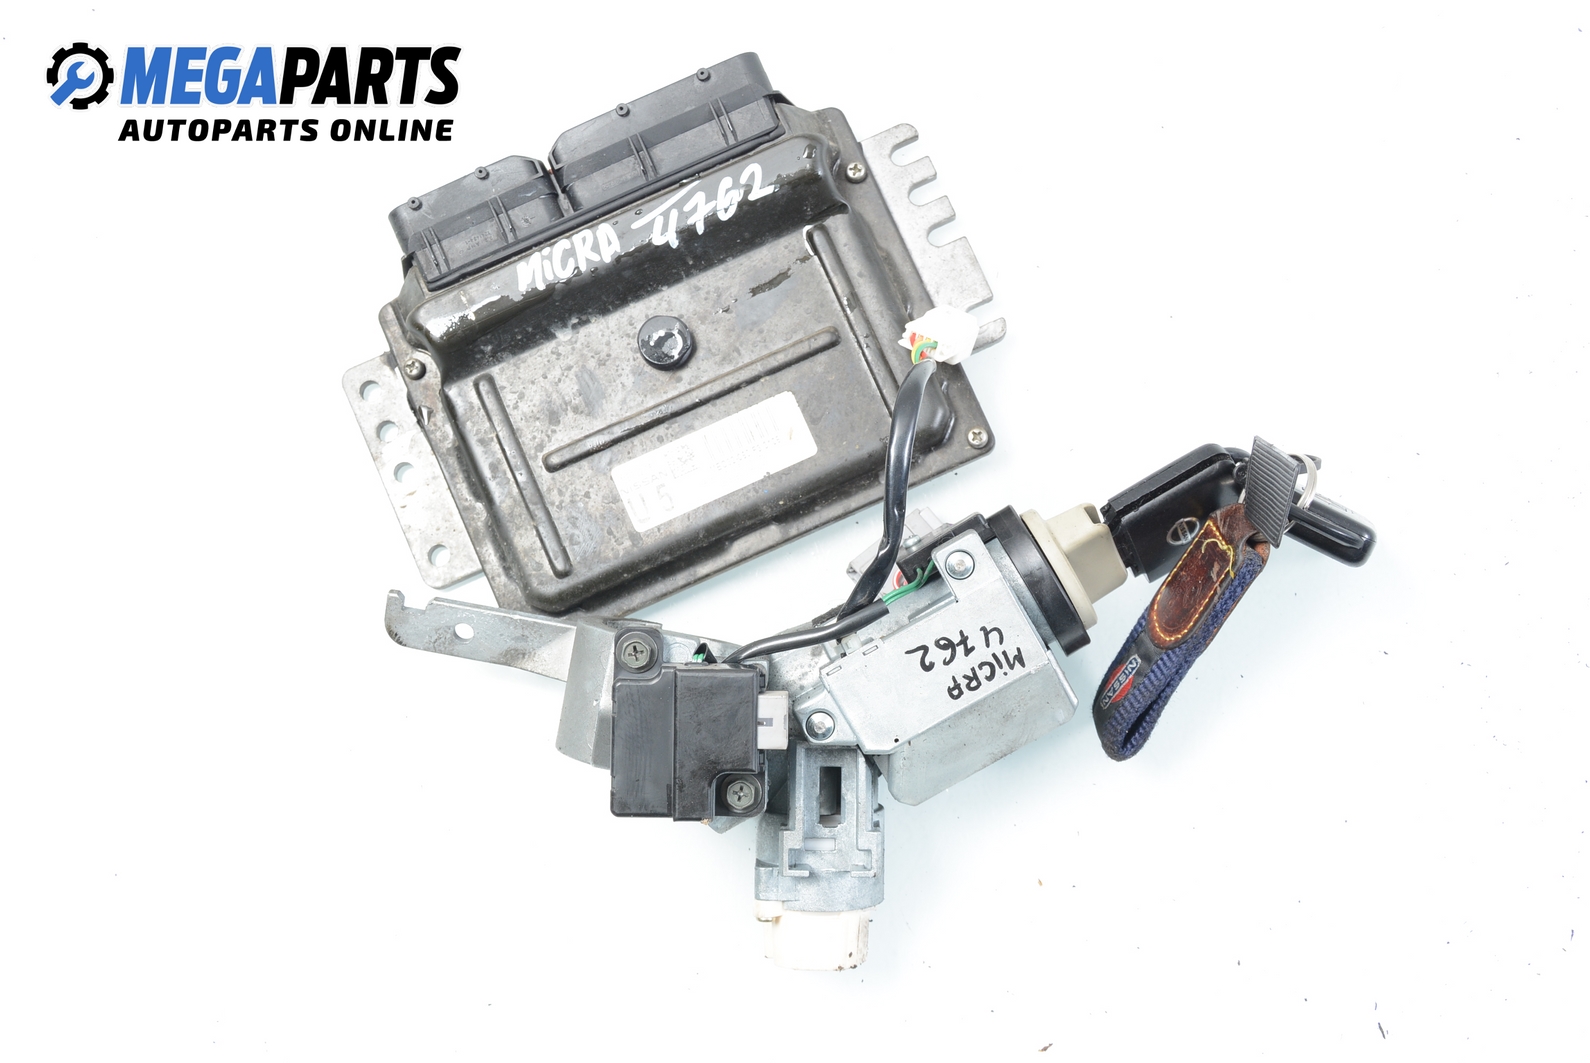 Ecu Incl. Ignition Key And Immobilizer For Nissan Micra (K12) 1.2 16V, 65 Hp, Hatchback Automatic, 2003 № Mec32-060 F3 3106 Price: € 144.00